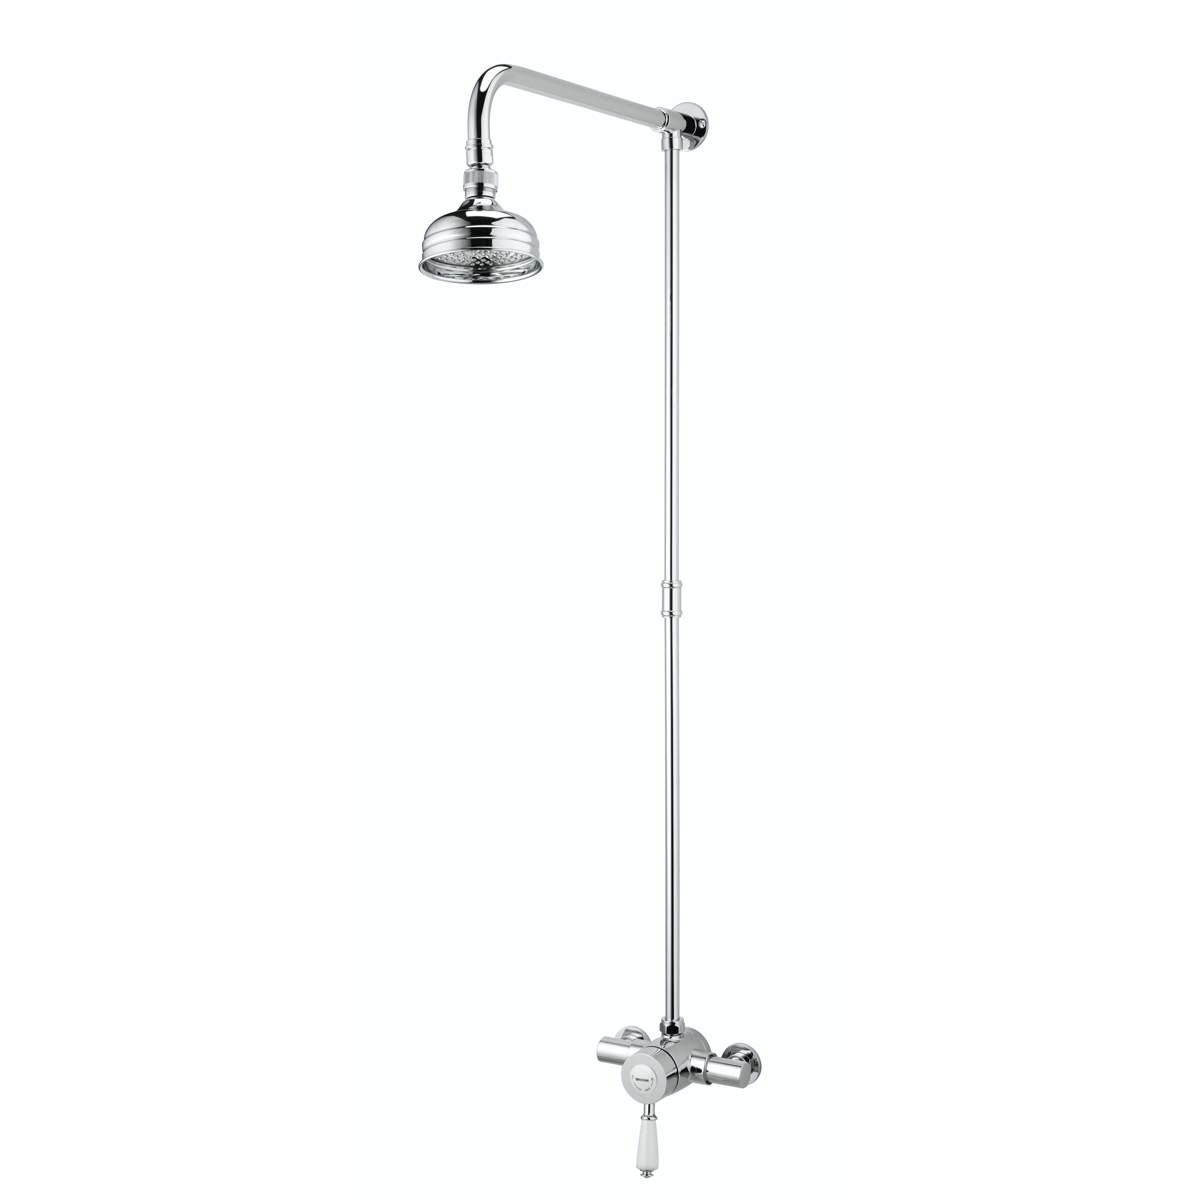 Bristan Colonial Thermostatic Exposed Mini Valve Shower with Rigid Riser (KN2 SHXRR C)